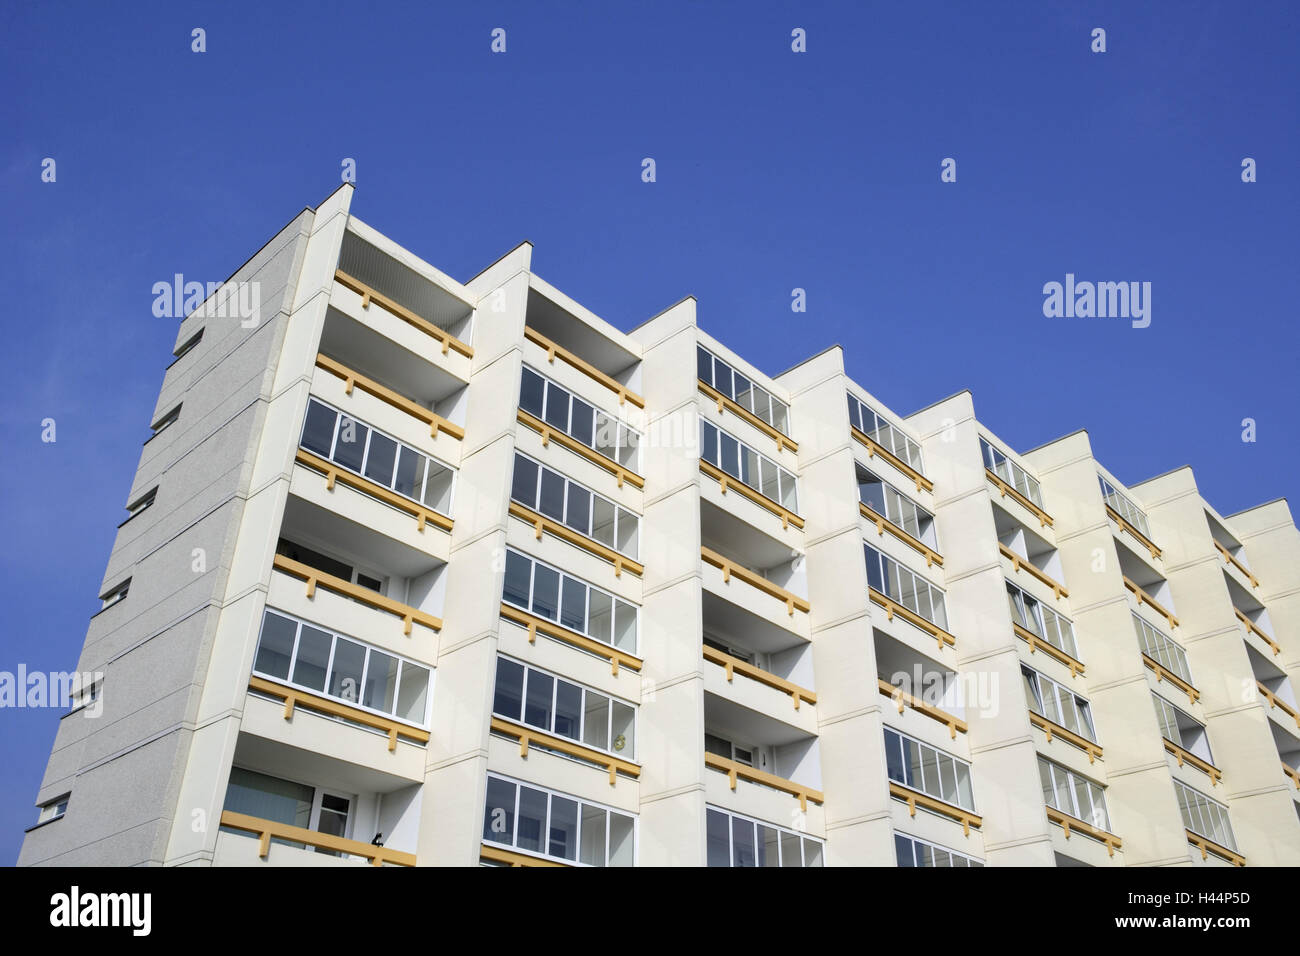 Germany, Lower Saxony, Cuxhaven, hotel, heaven, blue, North Germany, building, high rise, hotel building, beach hotel, outside, architecture, tourism, vacation, holiday apartments, flats, balconies, windows, tag, Stock Photo